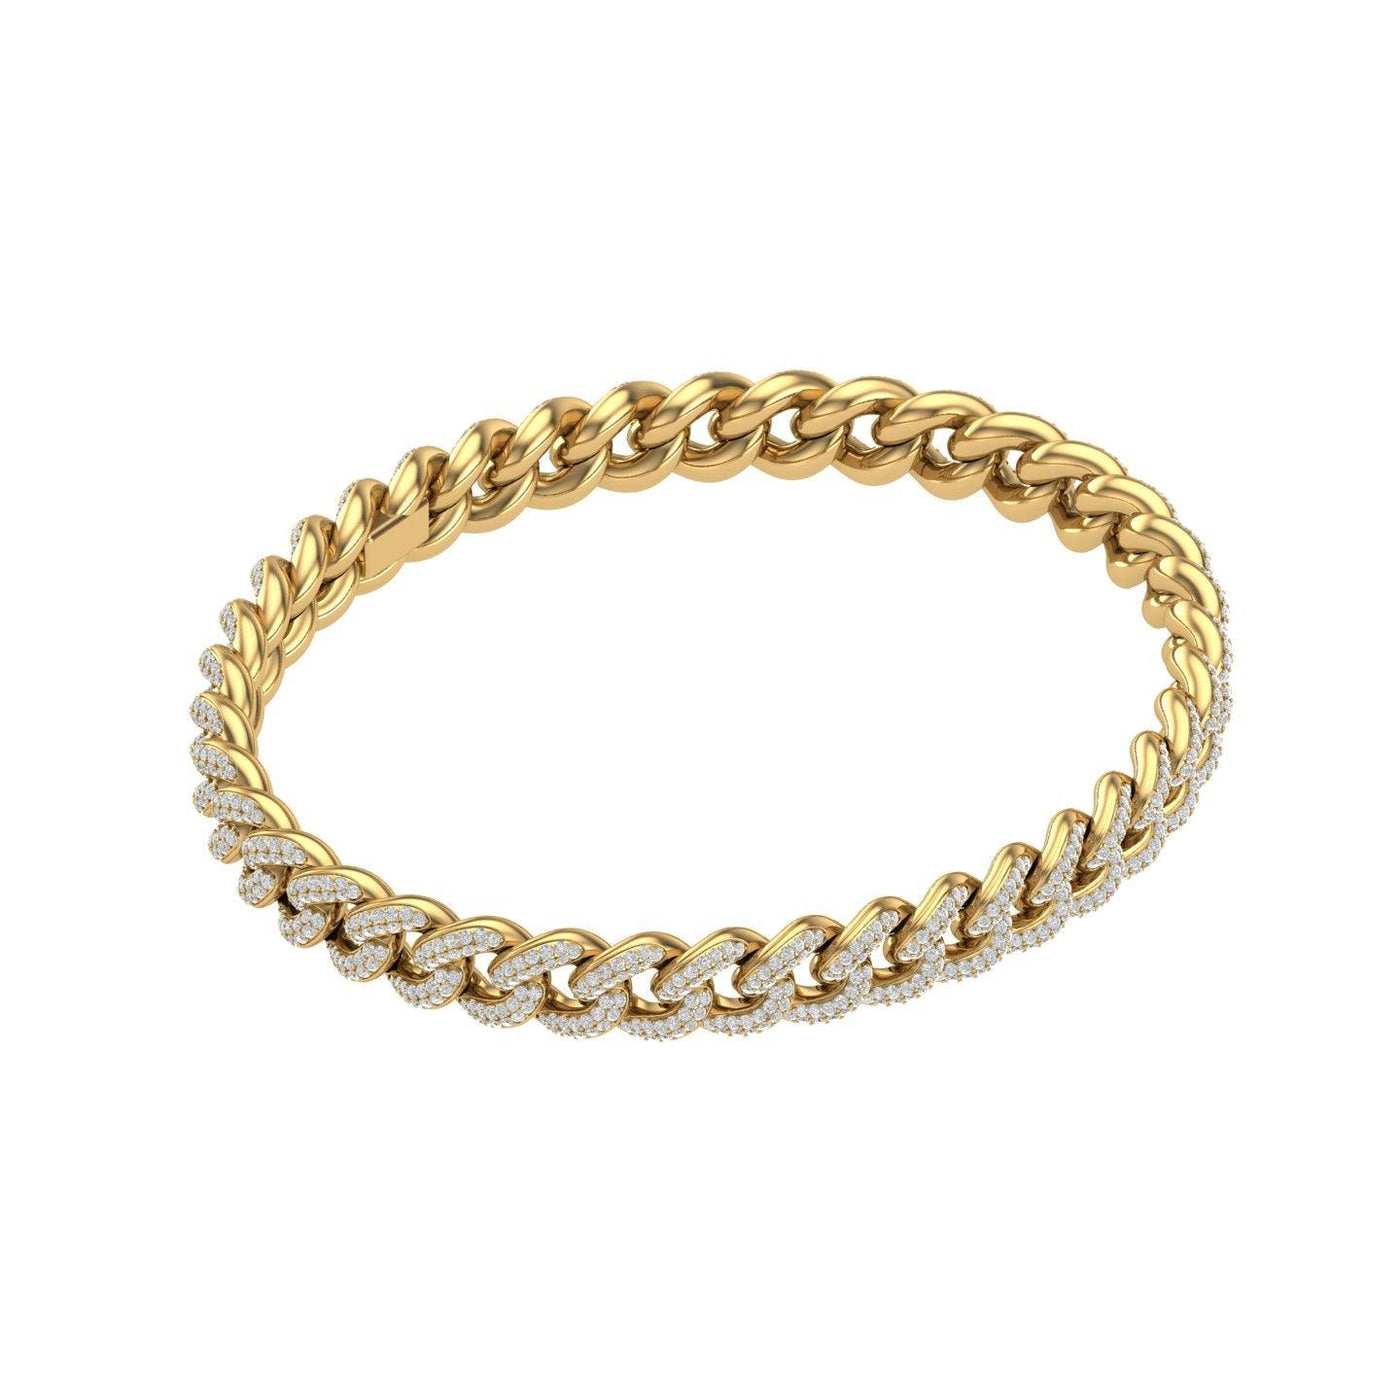 Gold Color 9mm Cuban Bracelet Made of 925 Sterling Silver Material